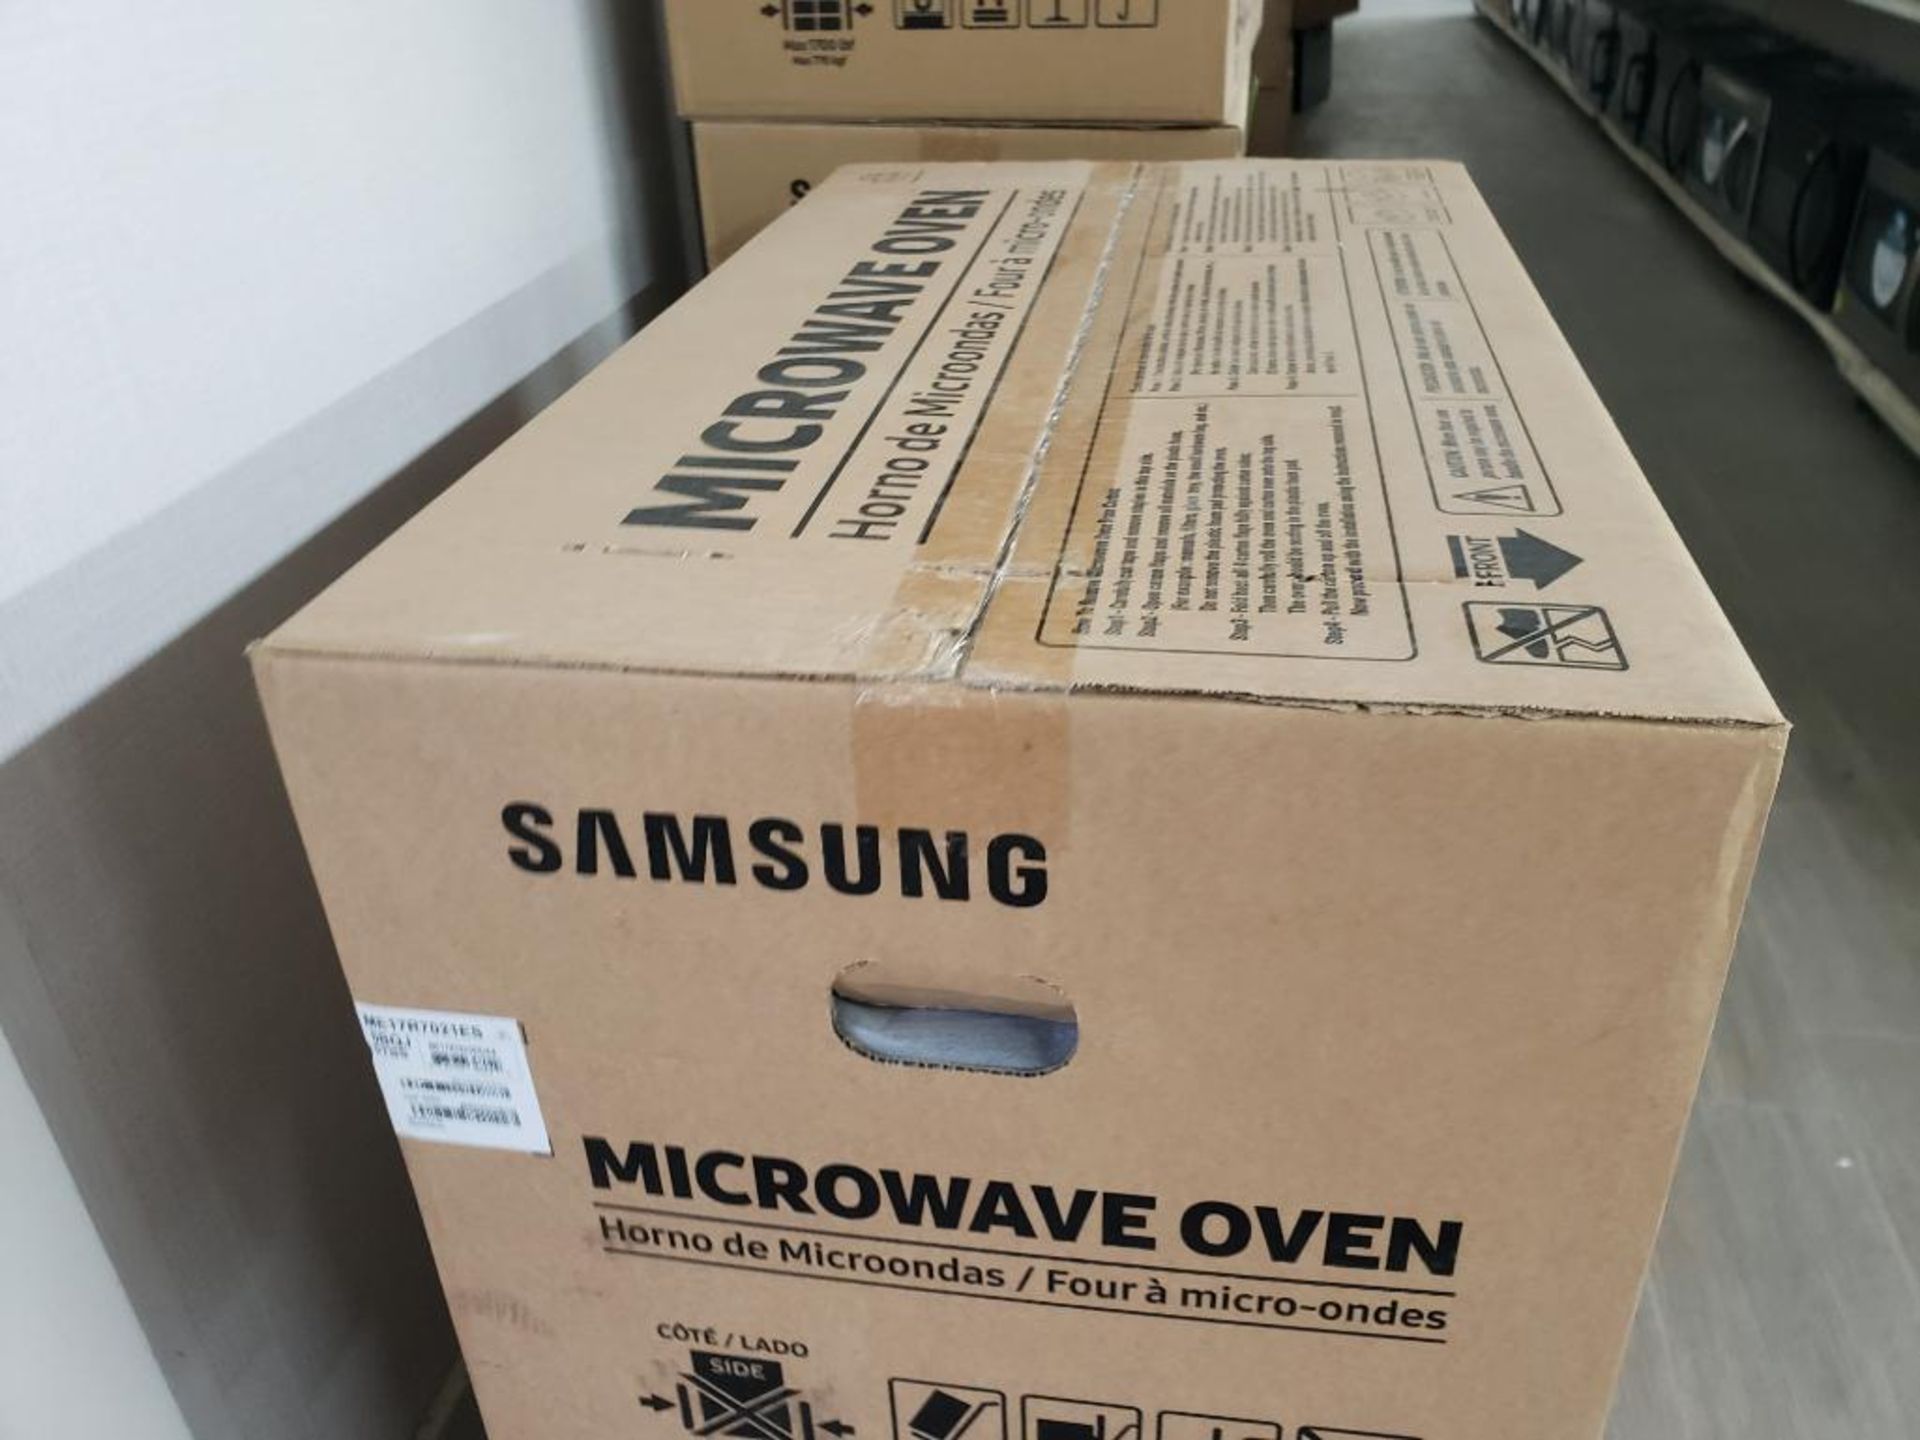 Samsung over the range microwave oven. Model number ME17R7021ES. New in box. - Image 3 of 4